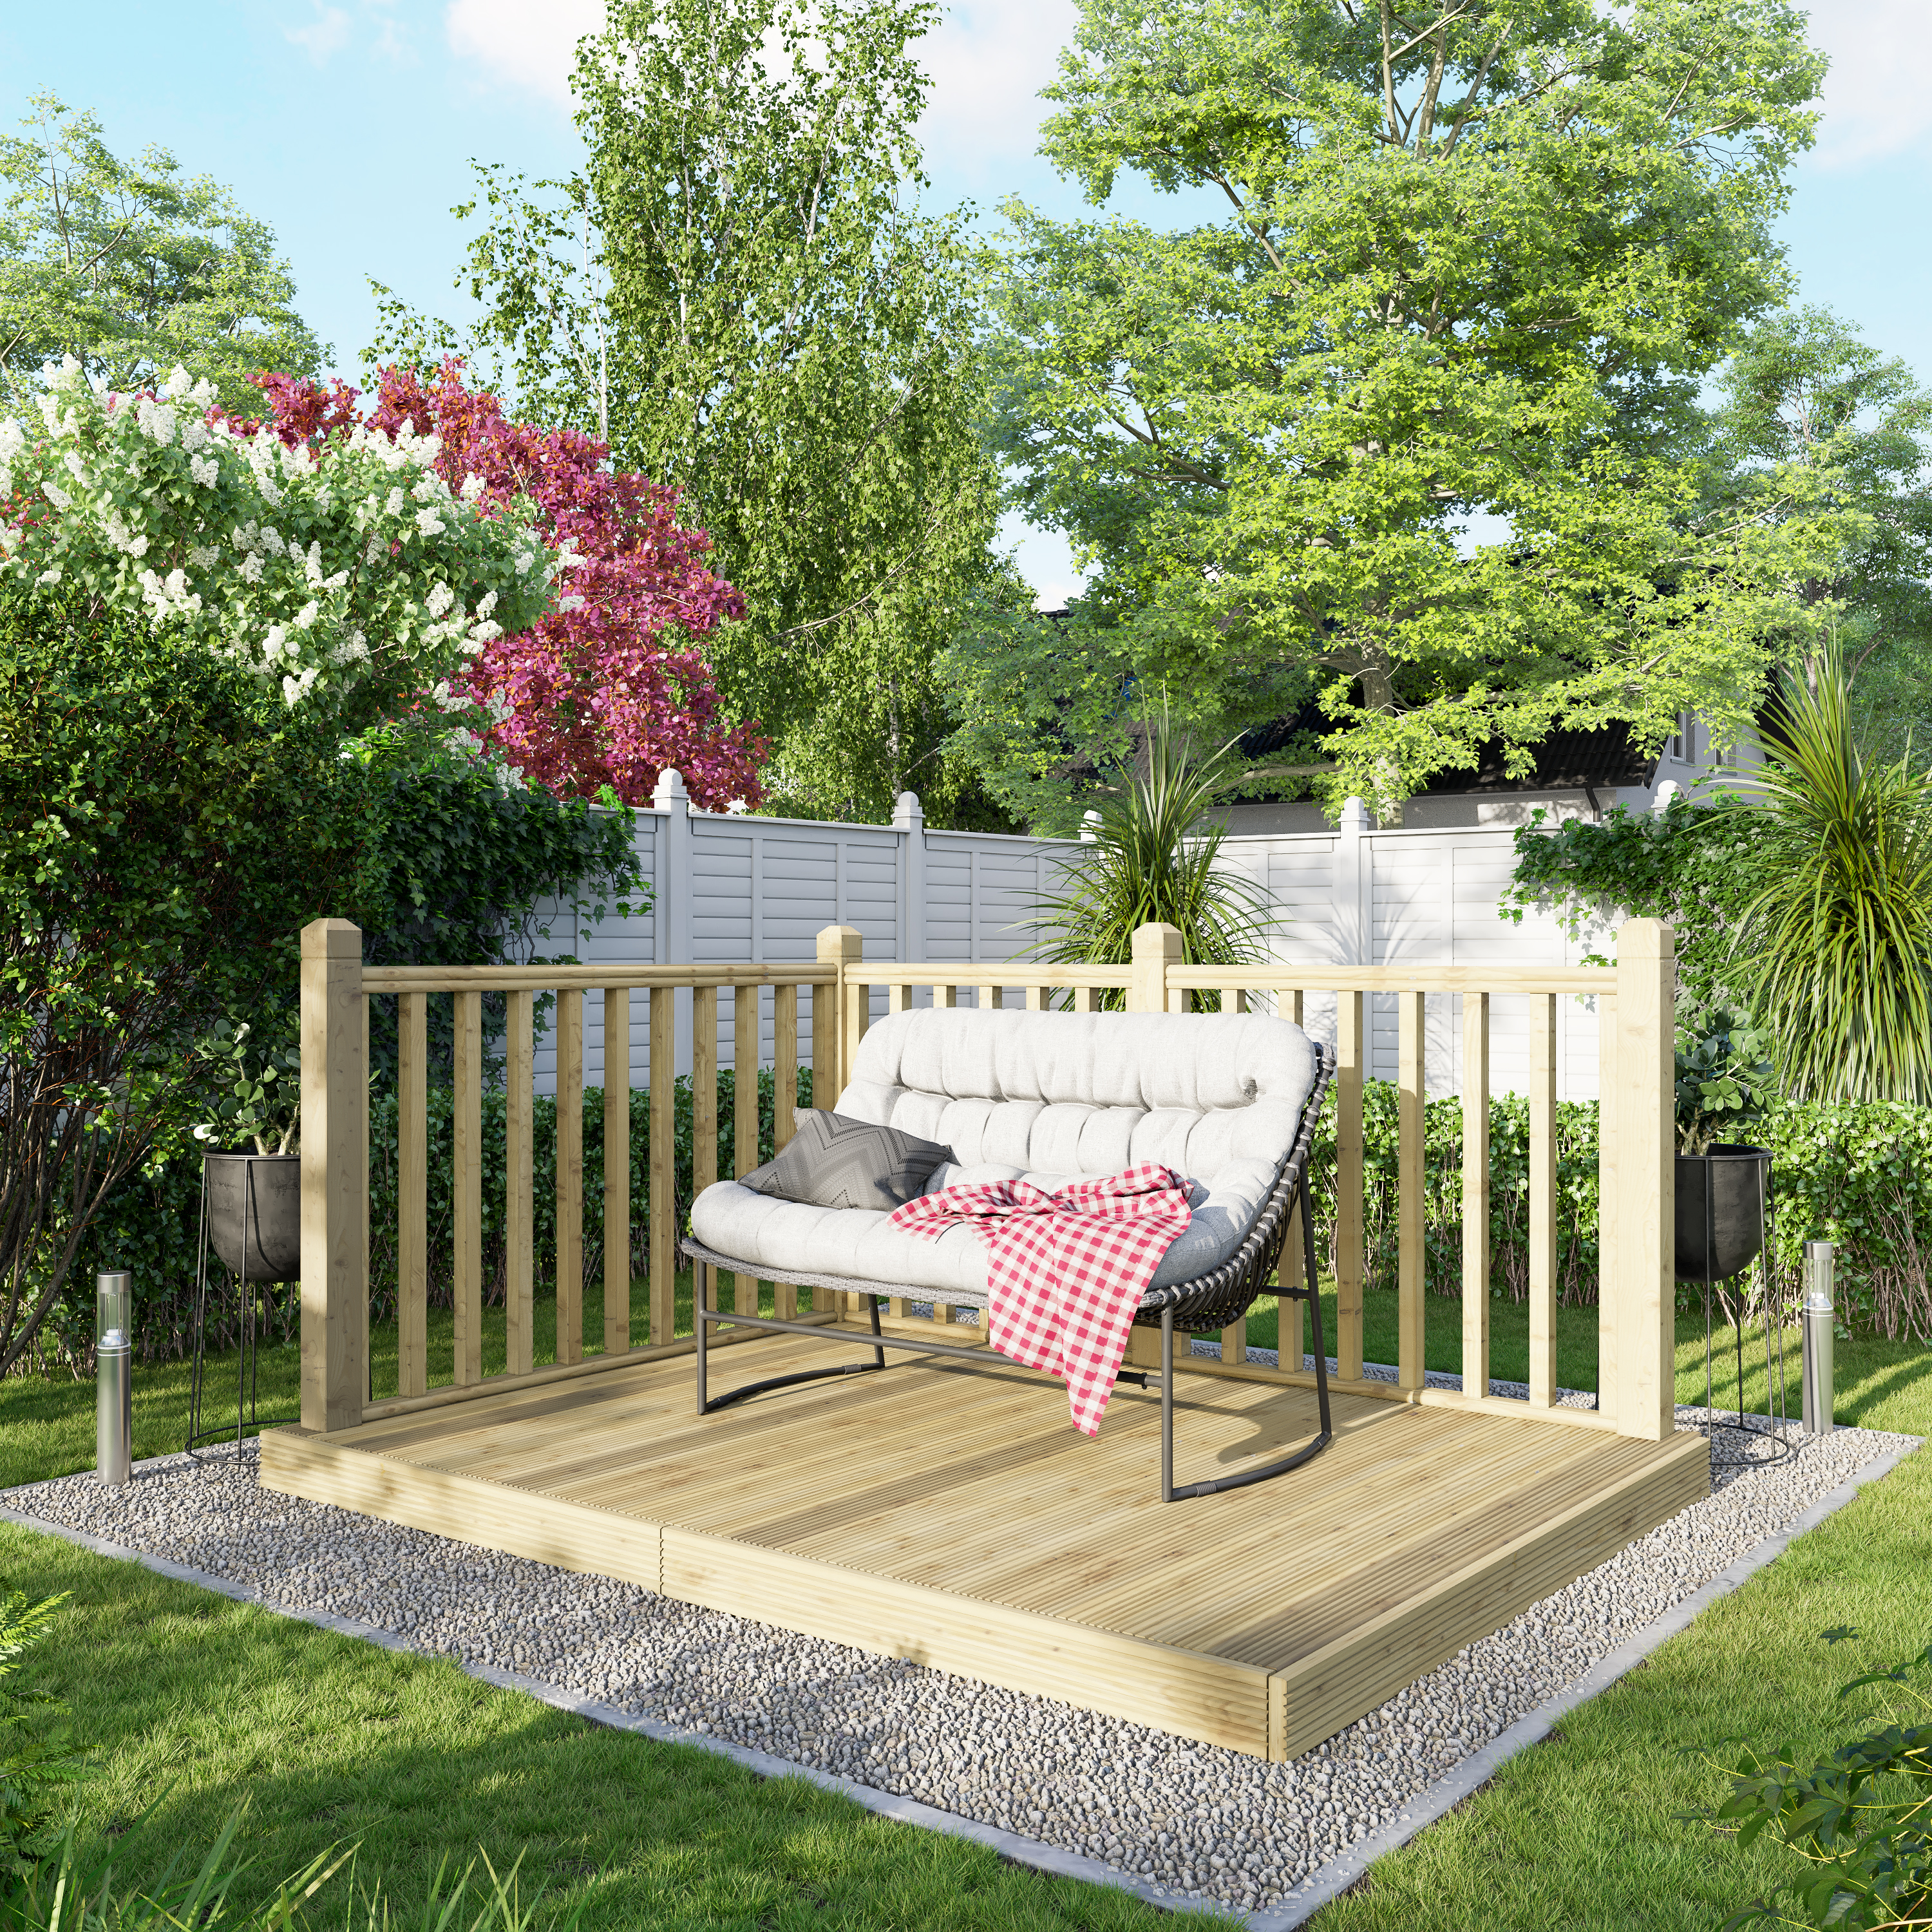 Image of Power Timber Decking Kit Handrails on Two Sides - 1.8 x 2.4m